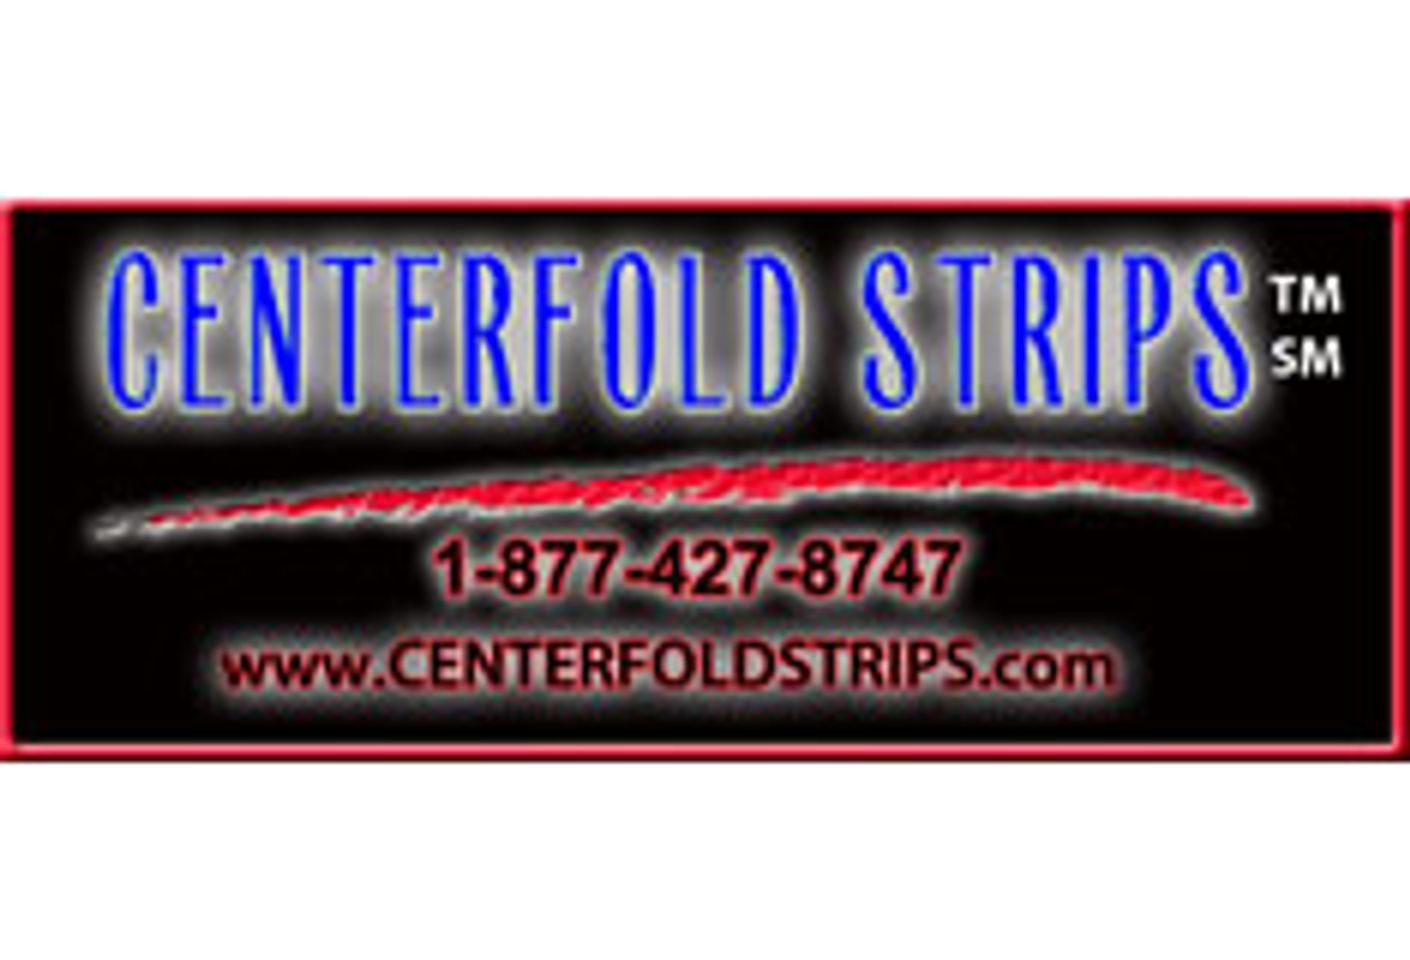 Centerfold Strips Names Little People Exotic Dancers Hot New Trend